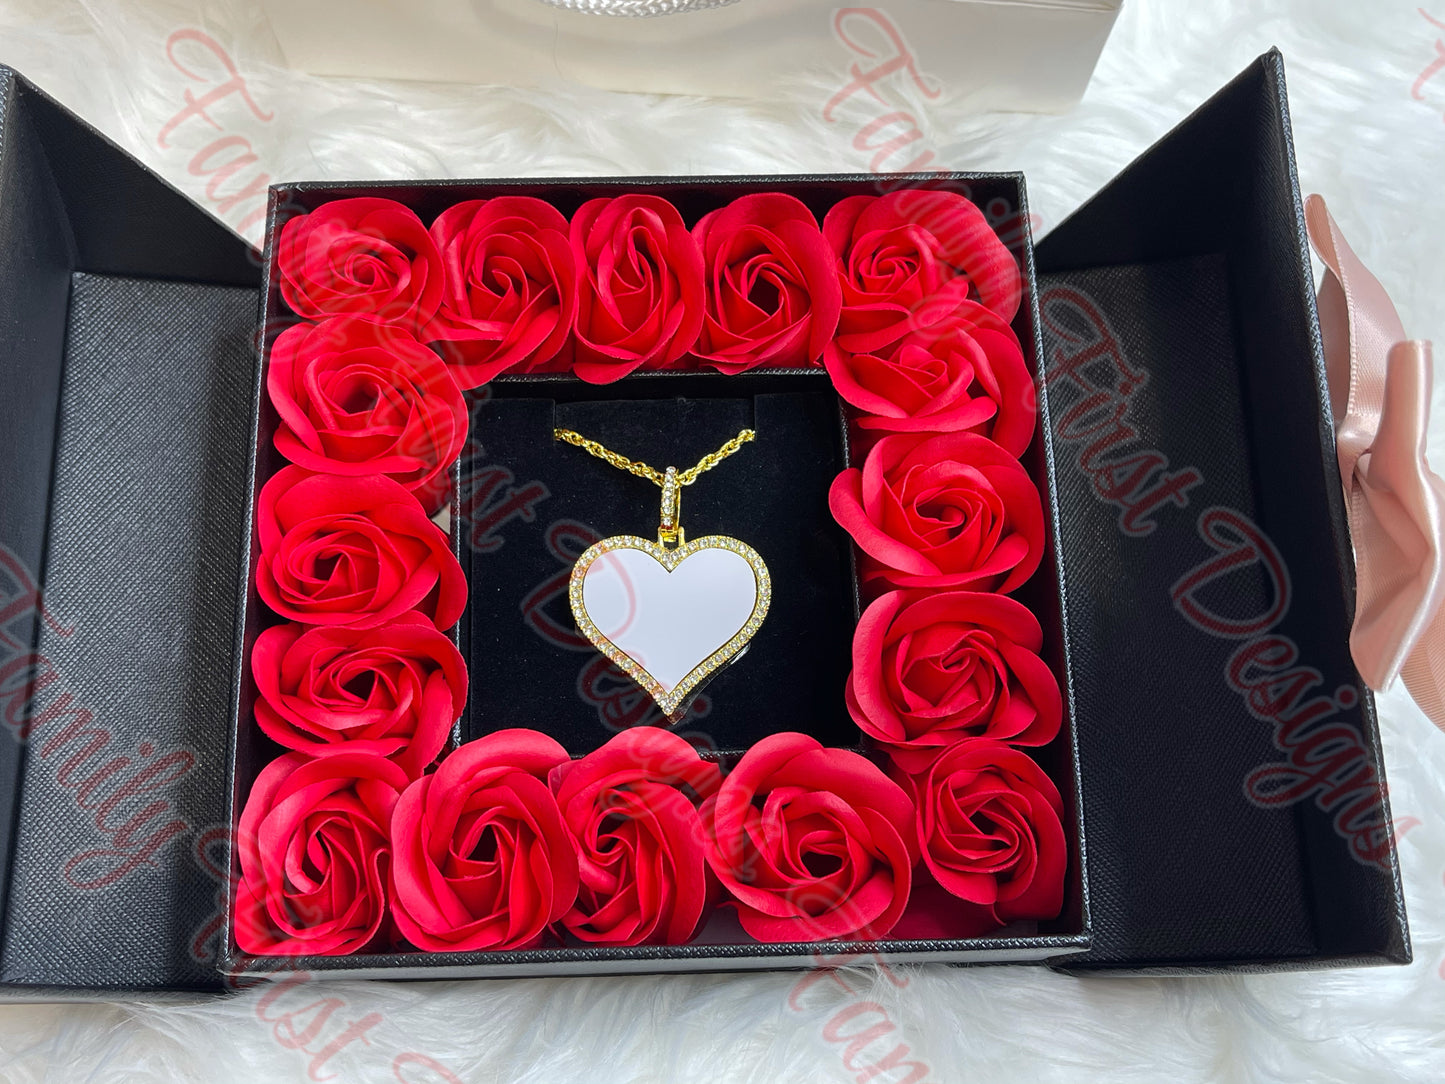 Soap Rose Jewelry Gift Box